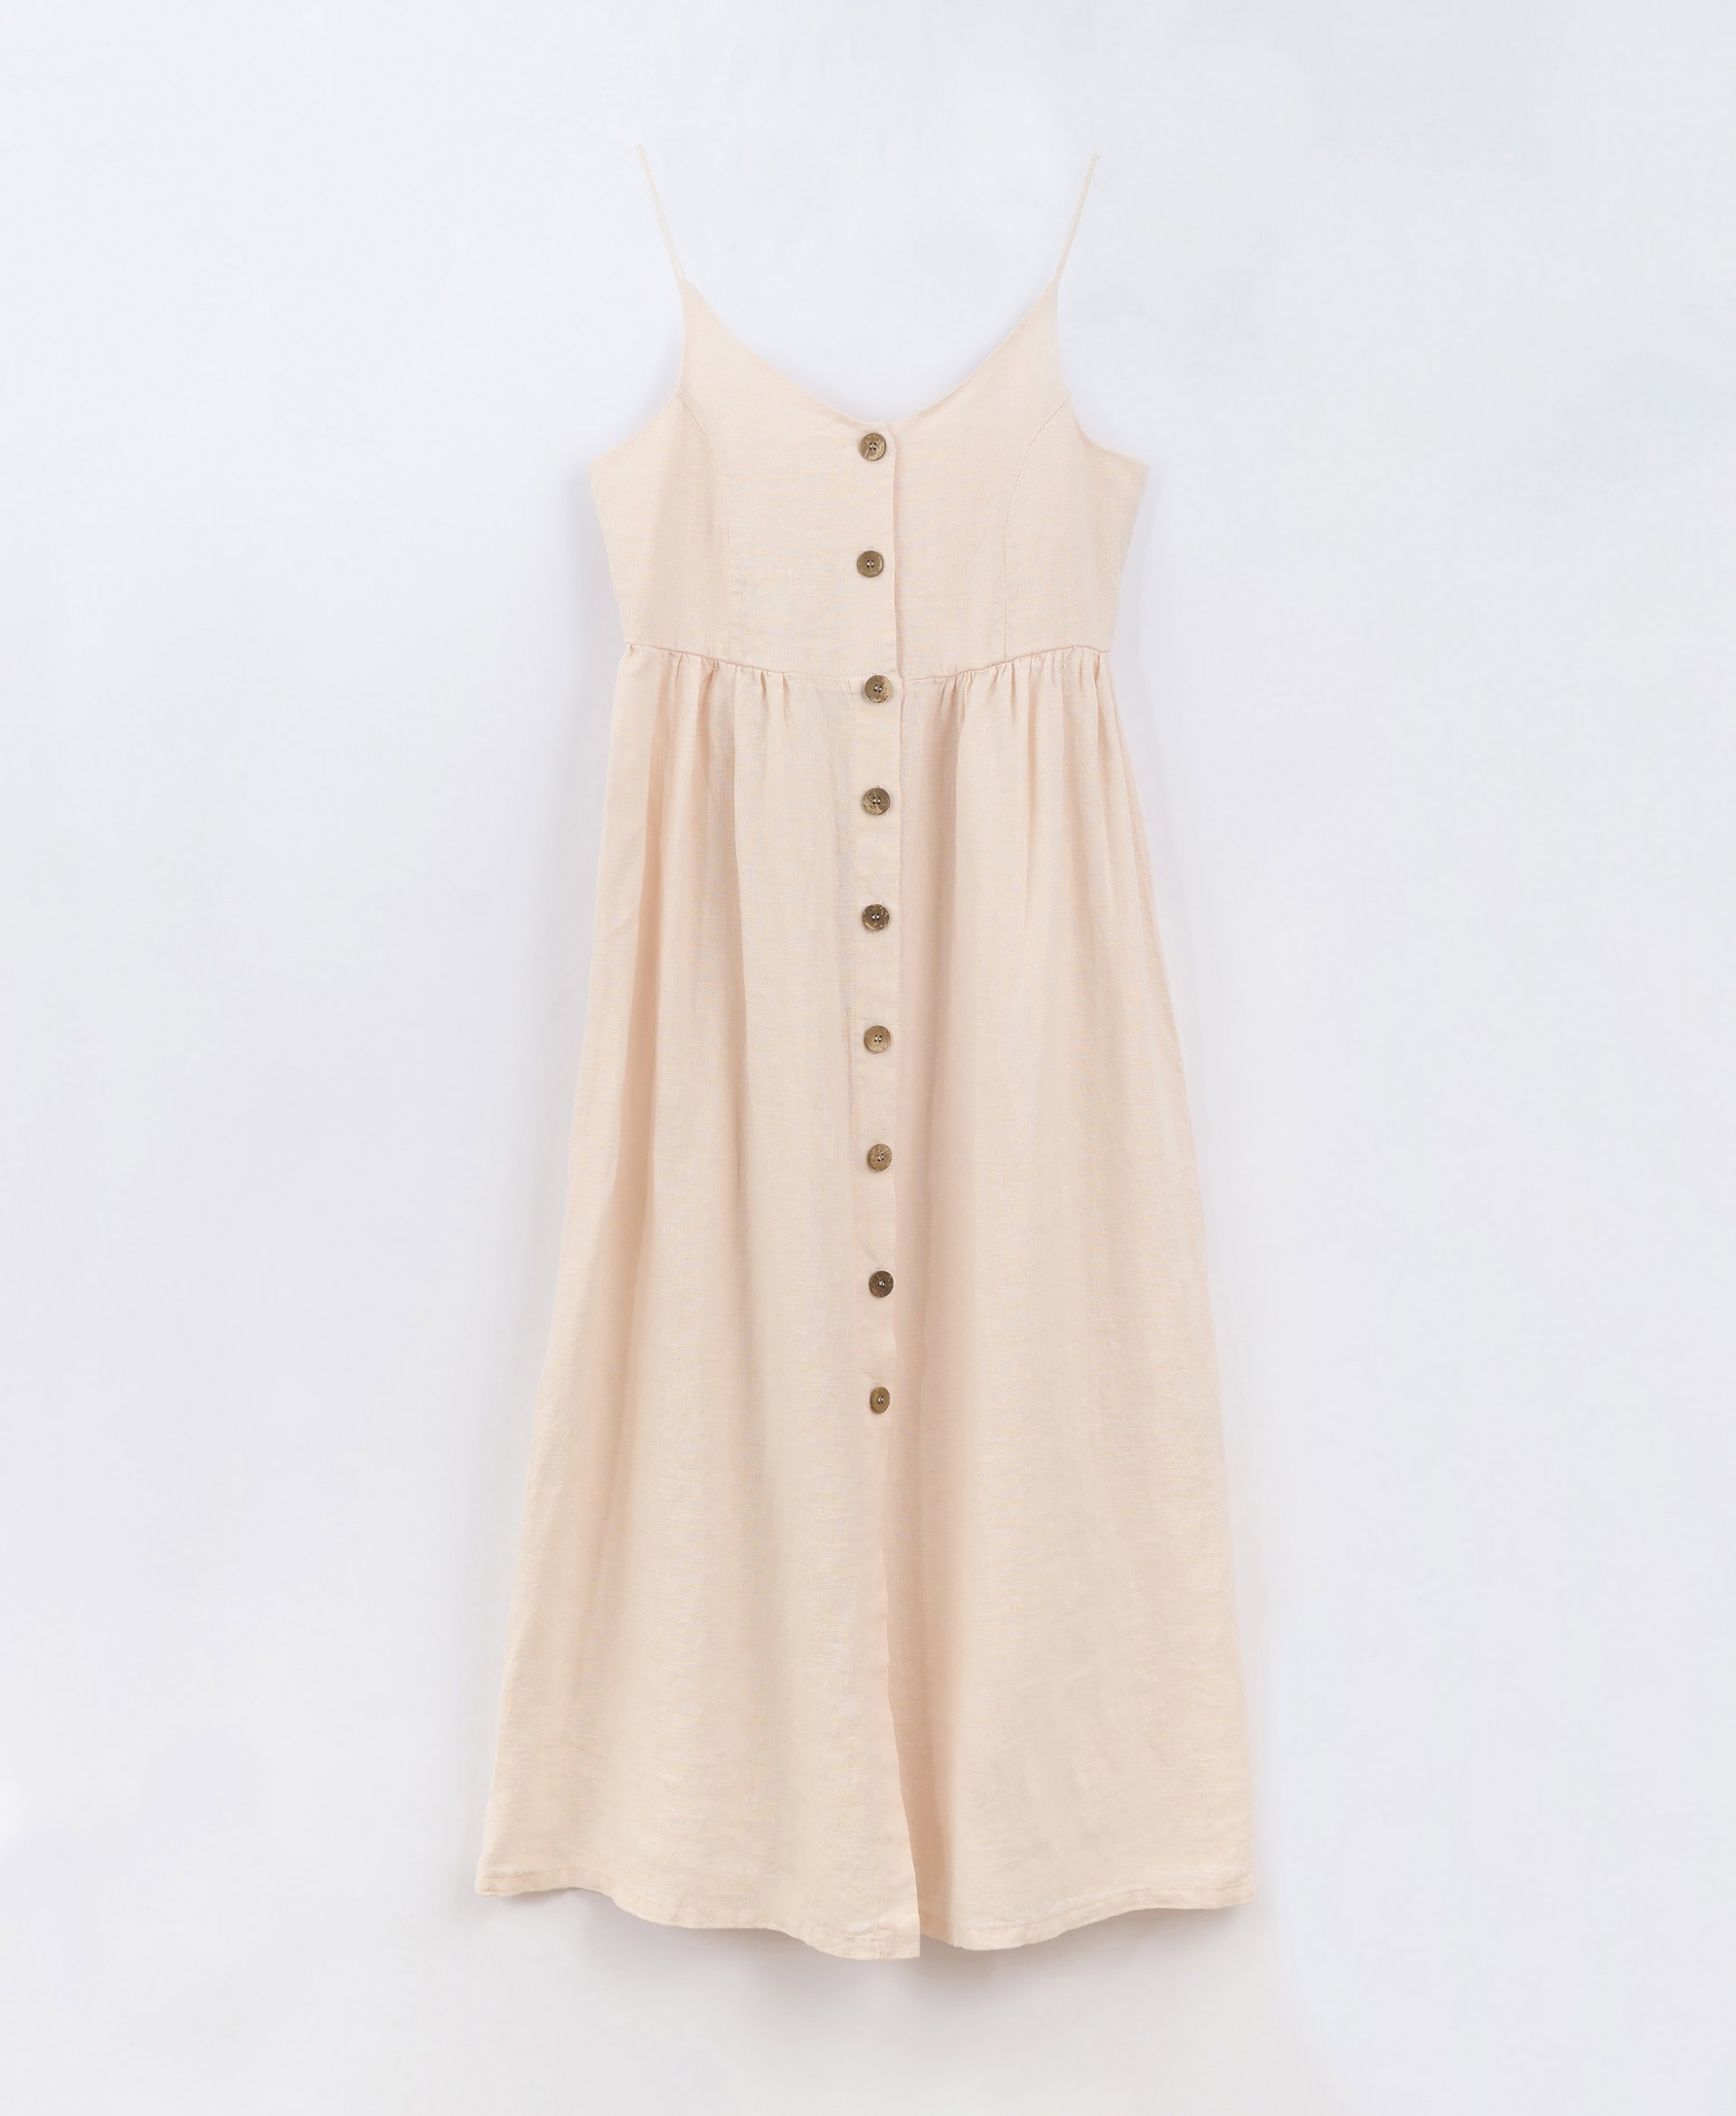 Linen dress with straps | Basketry